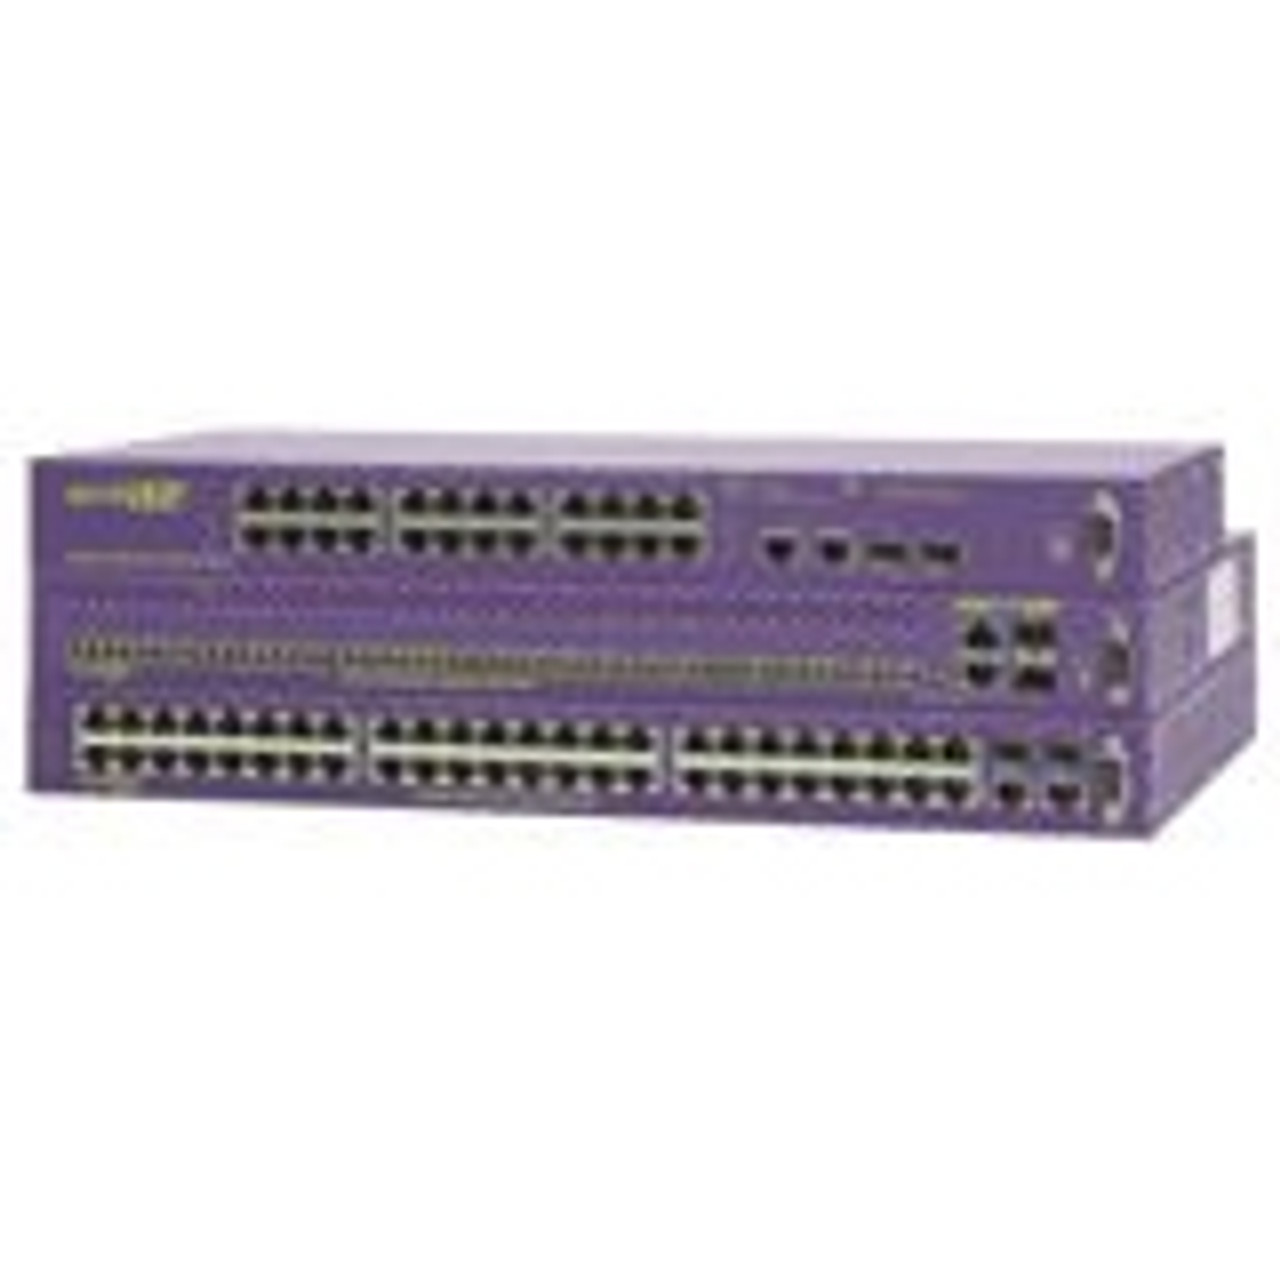 13234 Extreme Networks Summit 200-24FX-TAA Layer 3 Ethernet Switch with ExtremeWare (US Federal) 24 x 100Base-FX, 2 x 10/100/1000Base-T (Refurbished)